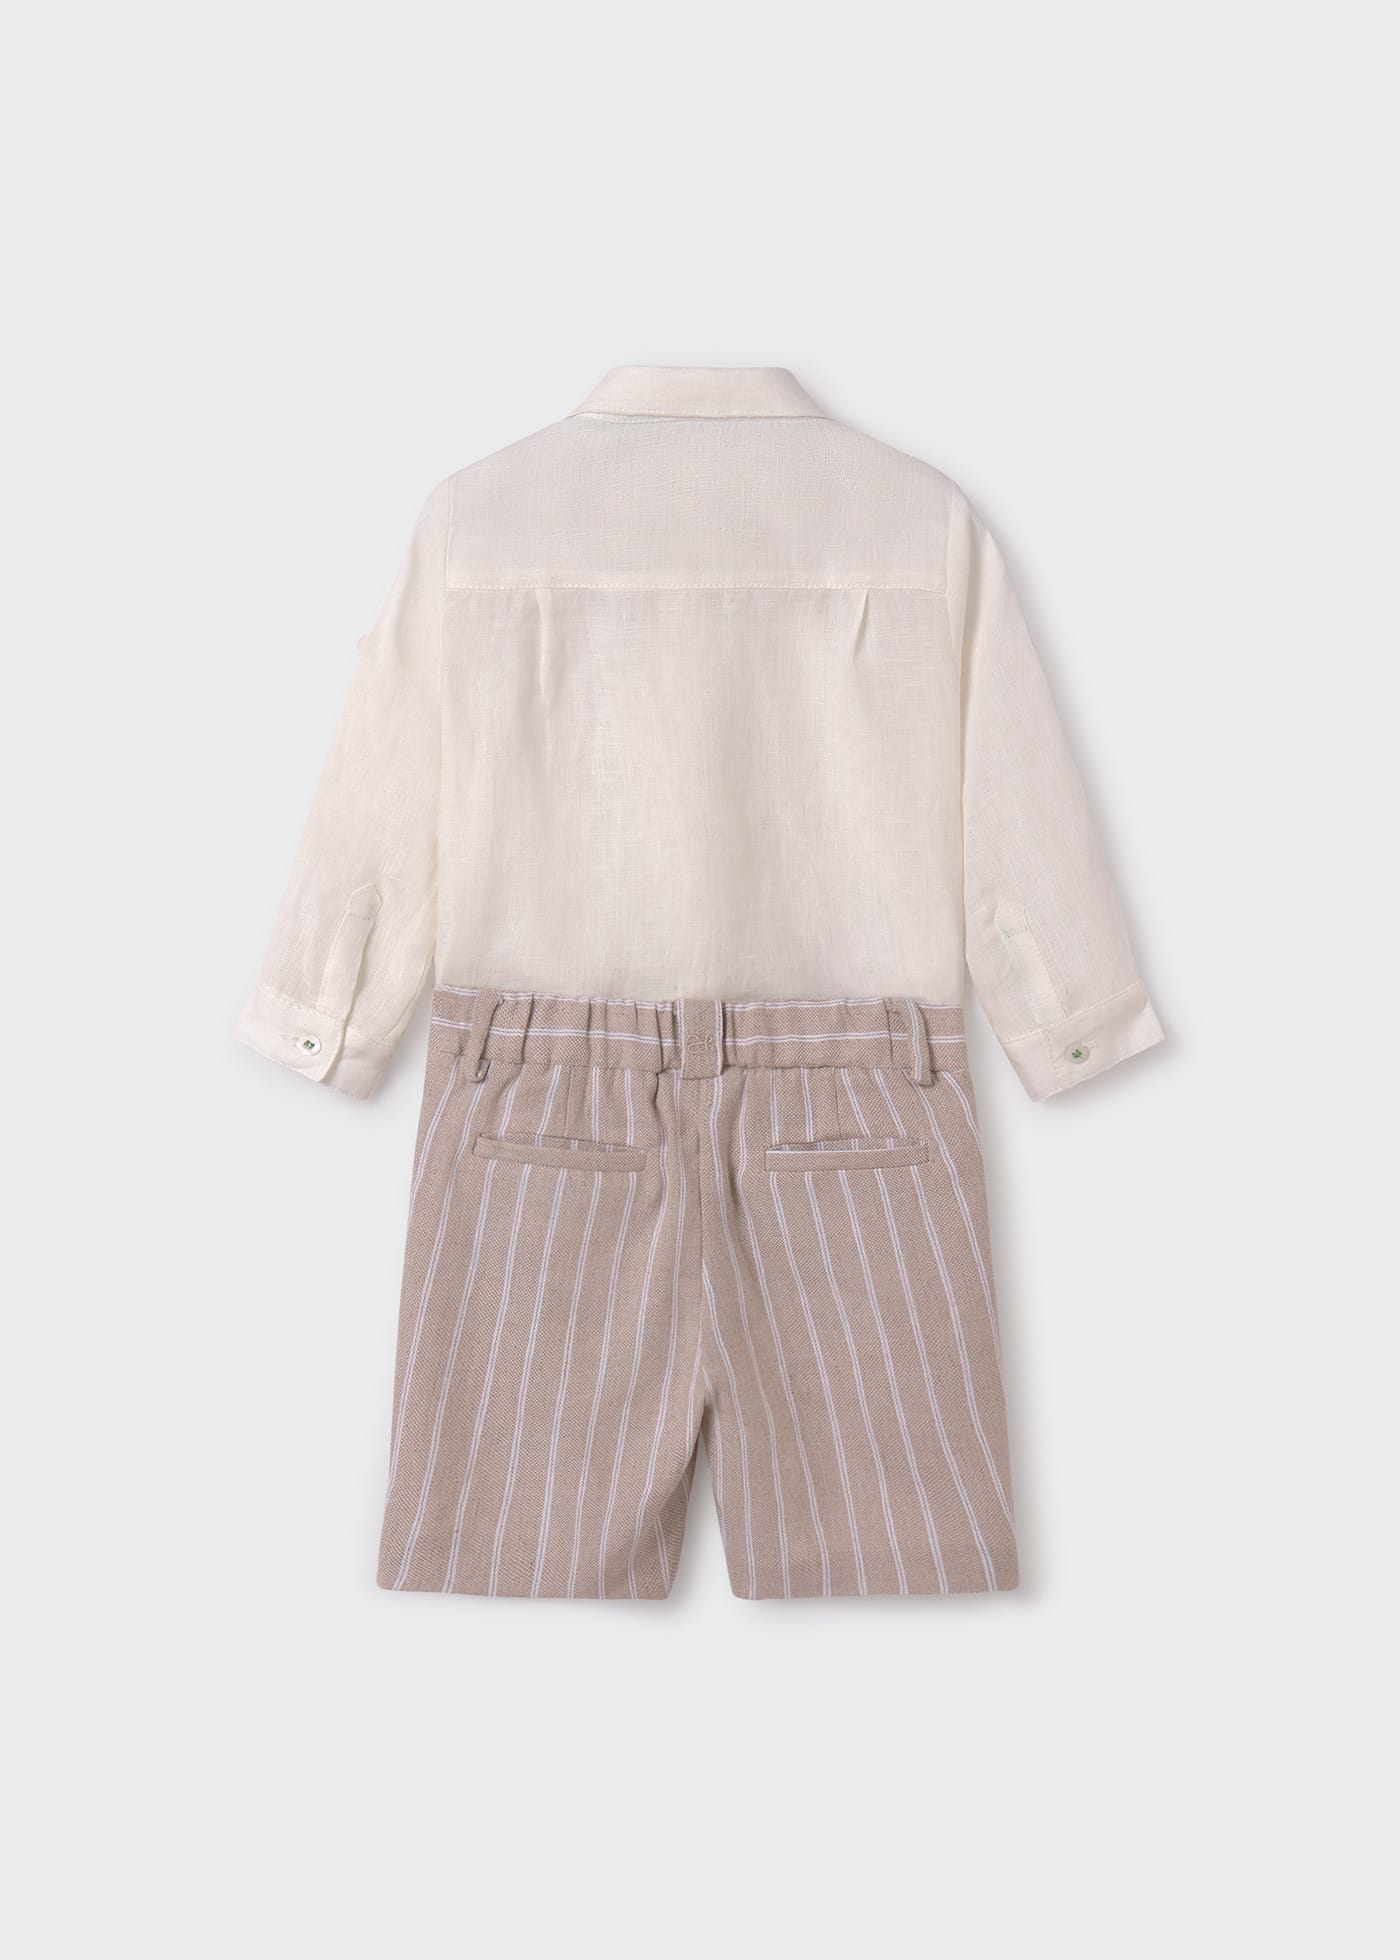 Boy set of linen shirt with bow tie and shorts